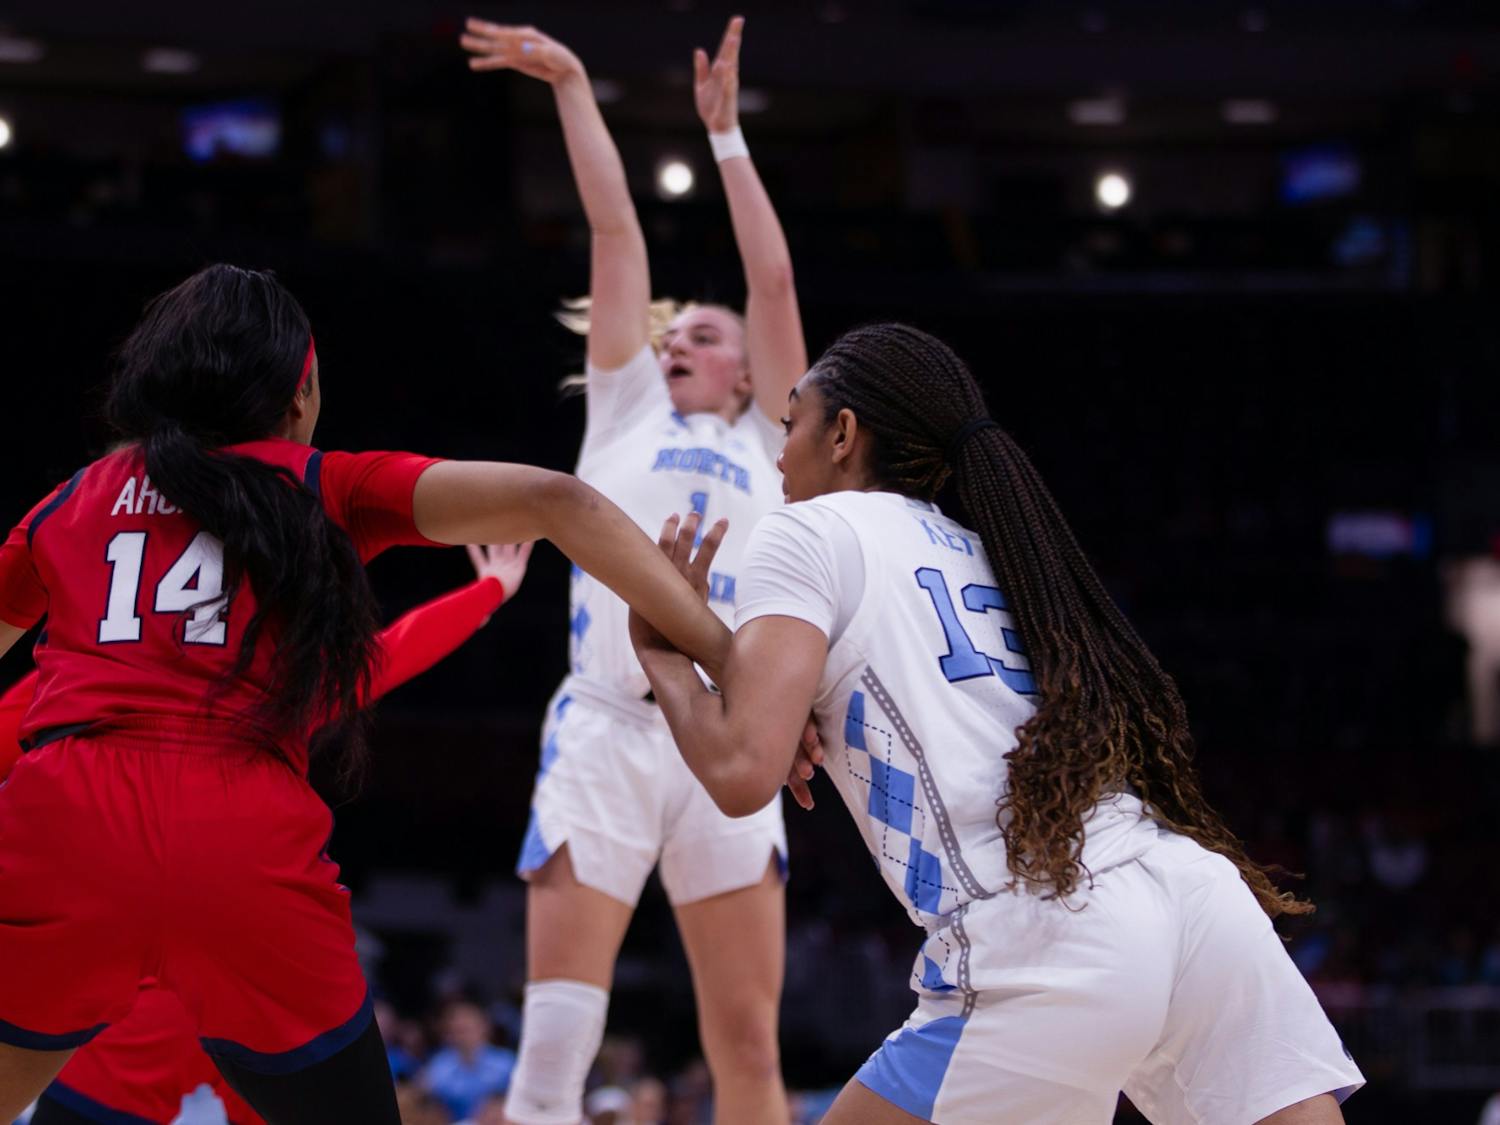 UNC redshirt first-year guard/forward Teonni Key (13) guarding an opponent during UNC’s NCAA Tournament first-round game against the St. John’s Red Storm in the Schottenstein Center in Columbus, Ohio on Saturday, March 18, 2023. The Tar Heels won 61-59.